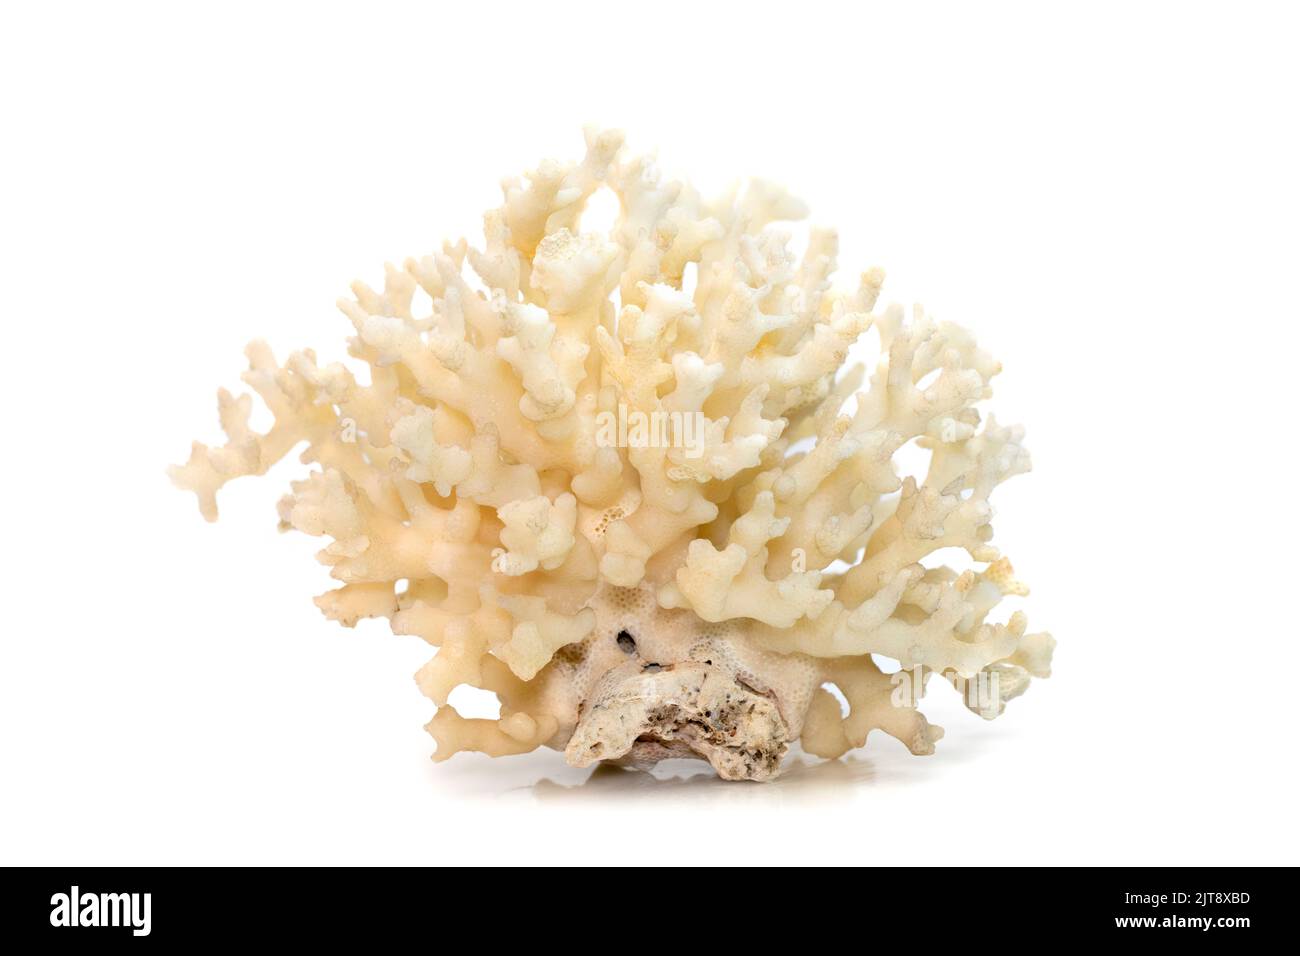 Image of dead white coral cubes on a white background. Undersea Animals. Stock Photo